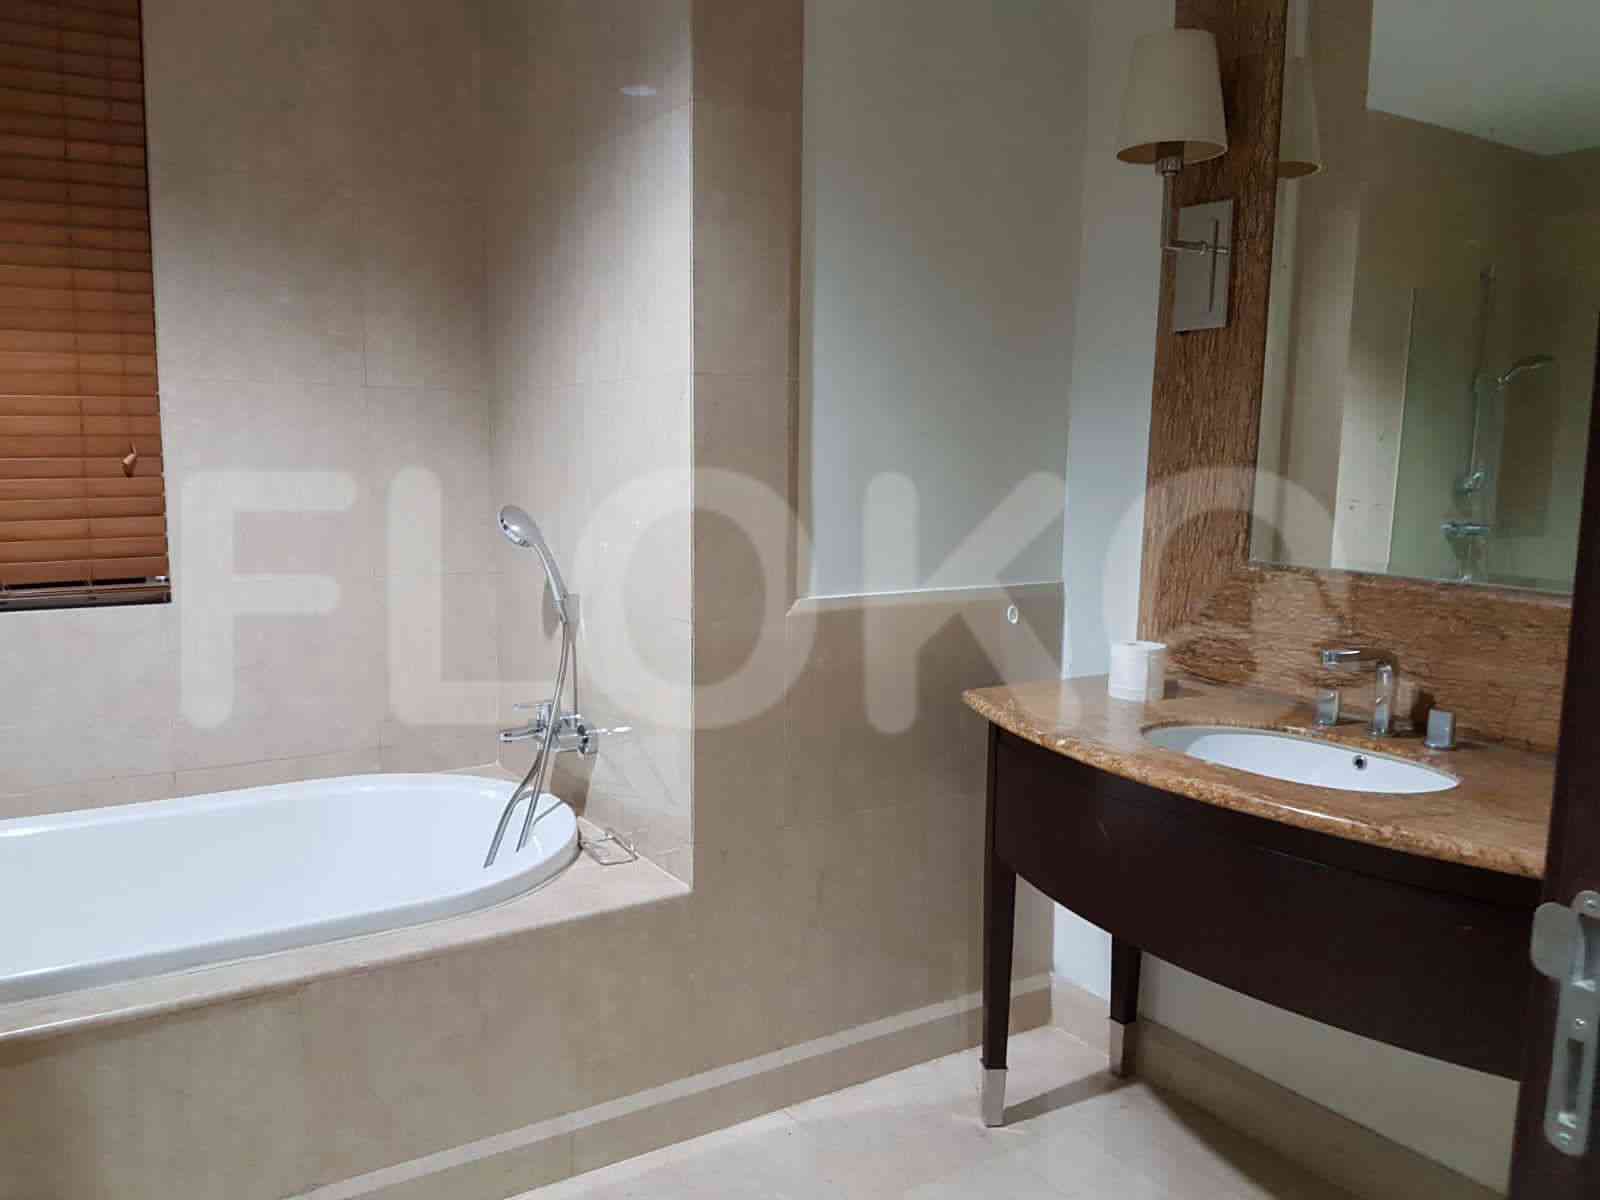 2 Bedroom on 15th Floor for Rent in Pakubuwono View - fga252 9